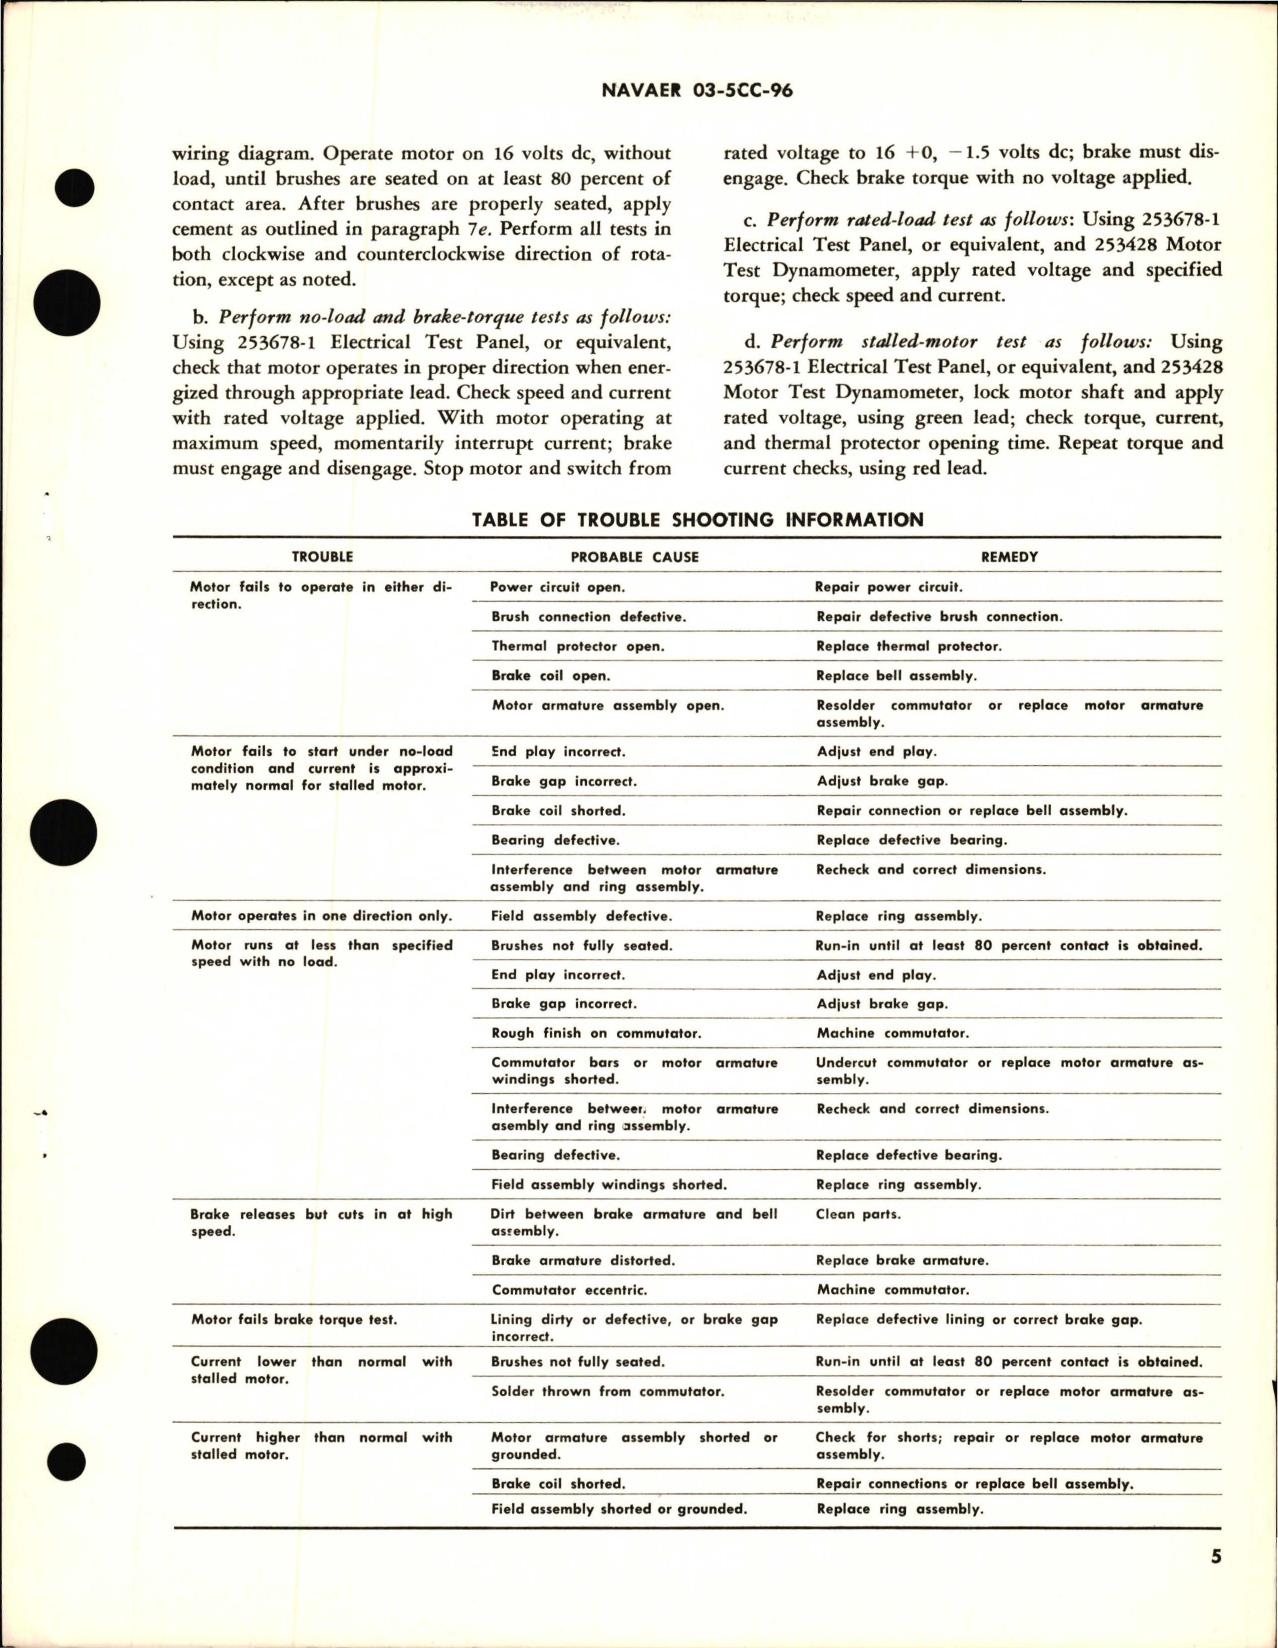 Sample page 5 from AirCorps Library document: Overhaul Instructions with Parts Breakdown for HP 26 Volt Direct Current Motor 0.15 - Part 27700-2 